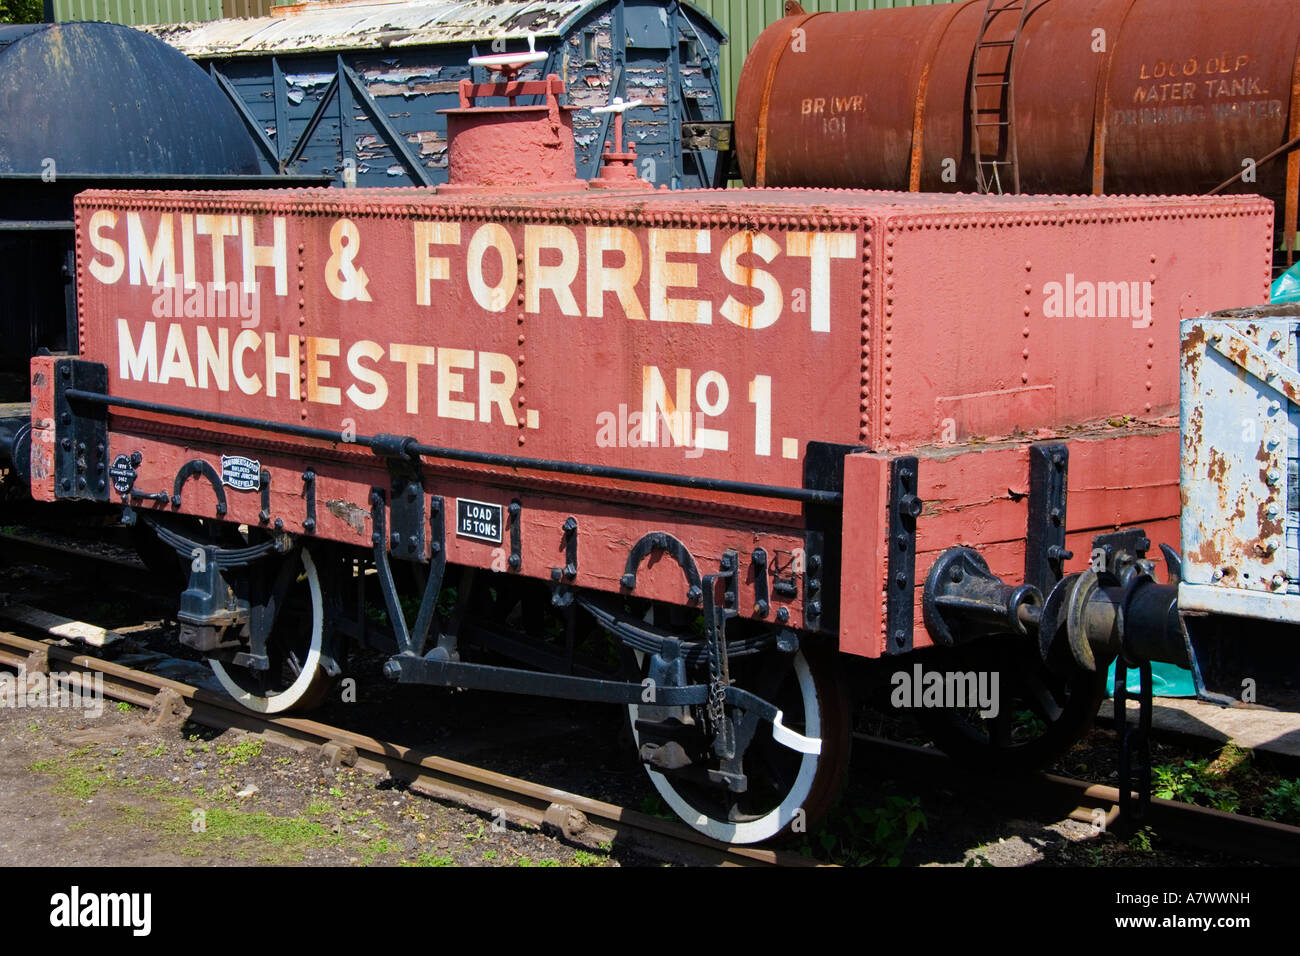 Vintage goods wagon Great Western Railway train at Didcot Railway Centre May 2007 JMH2813 Stock Photo